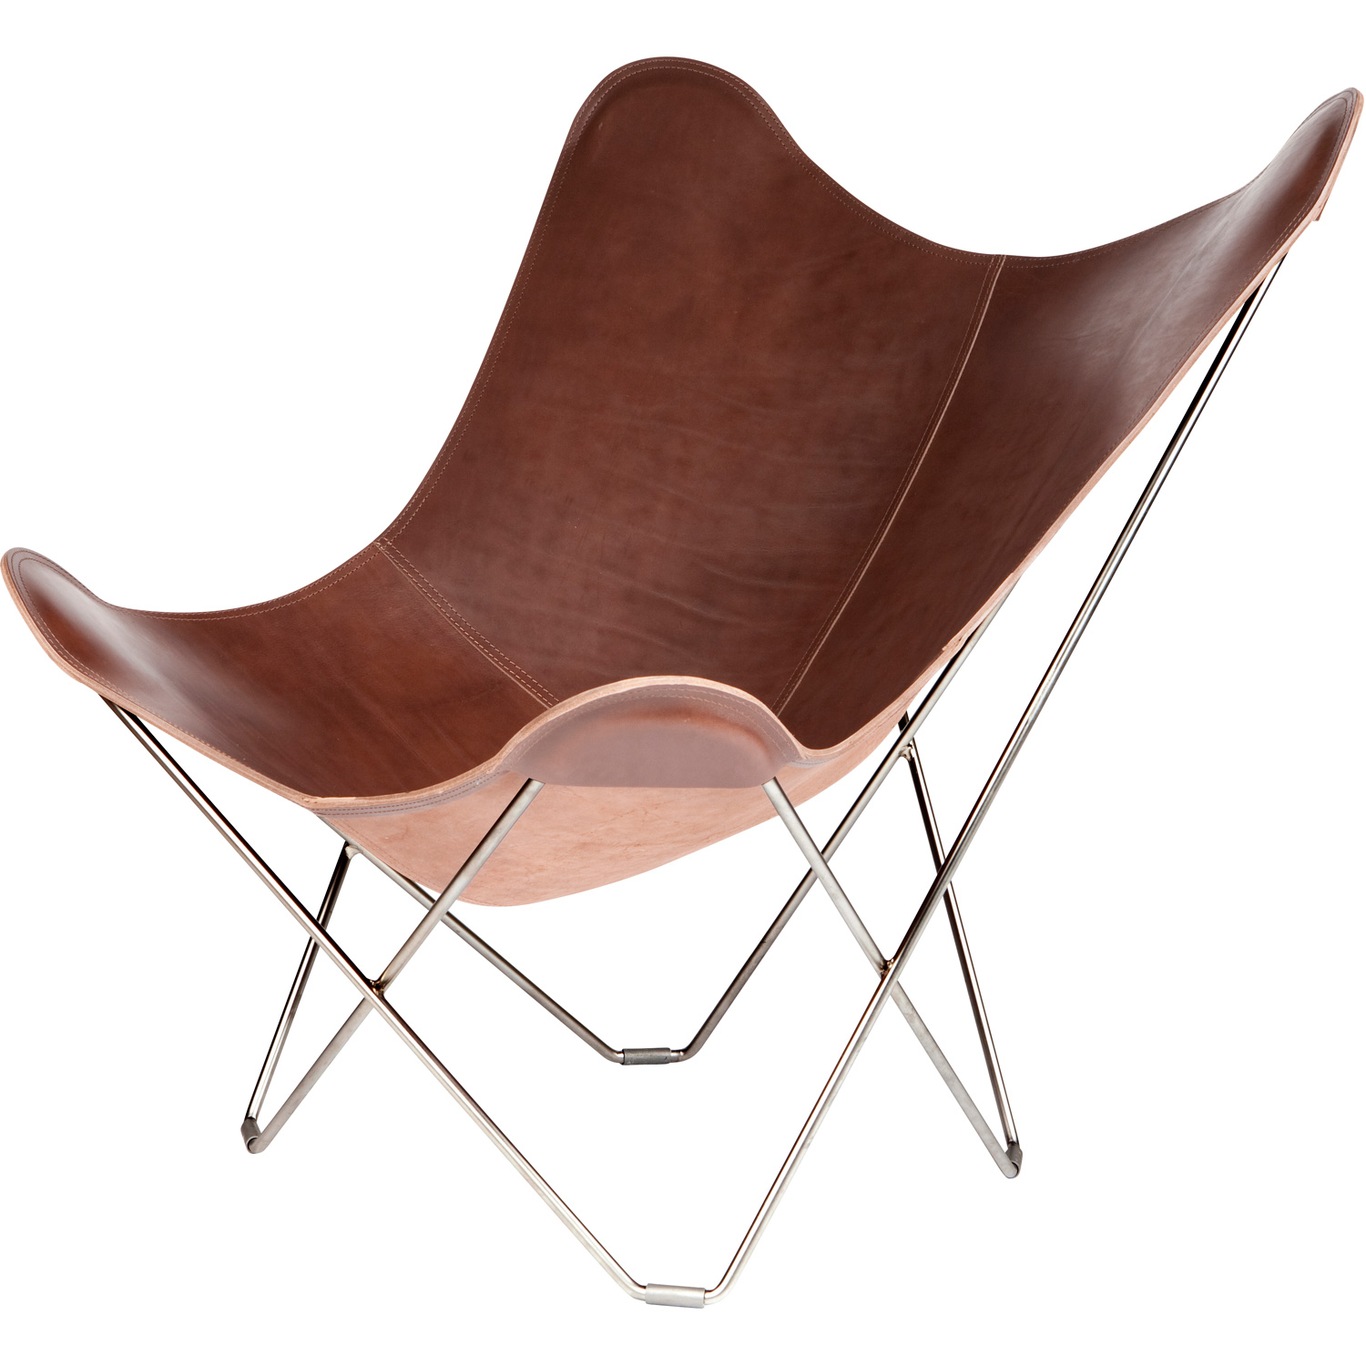 Pampa Mariposa Butterfly Chair, Chocolate/Chrome